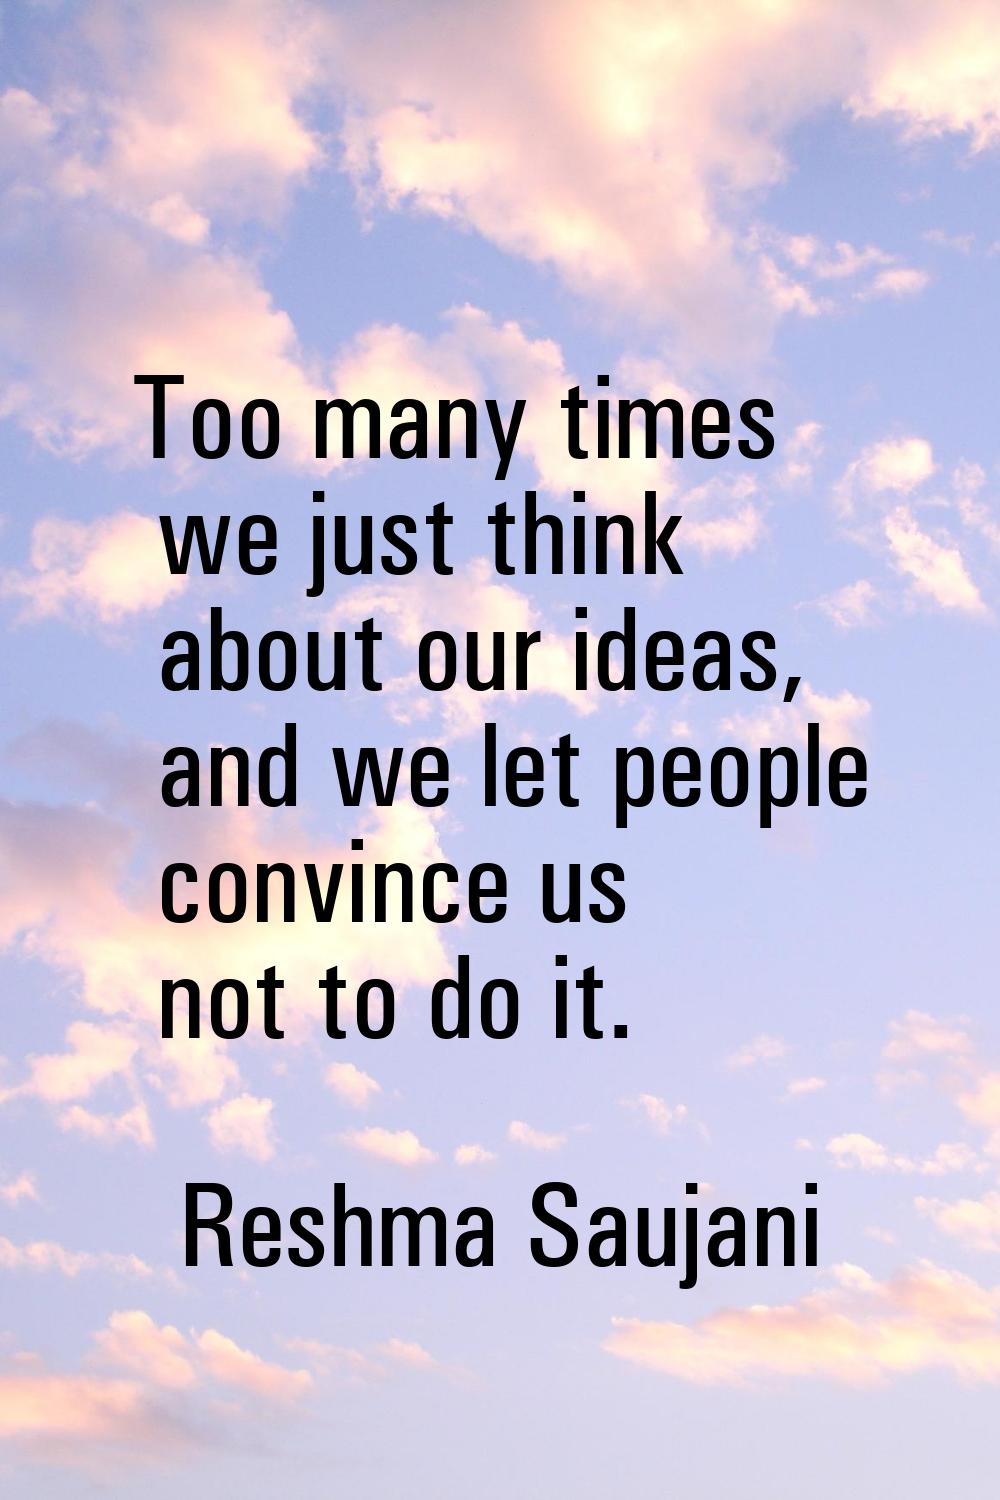 Too many times we just think about our ideas, and we let people convince us not to do it.